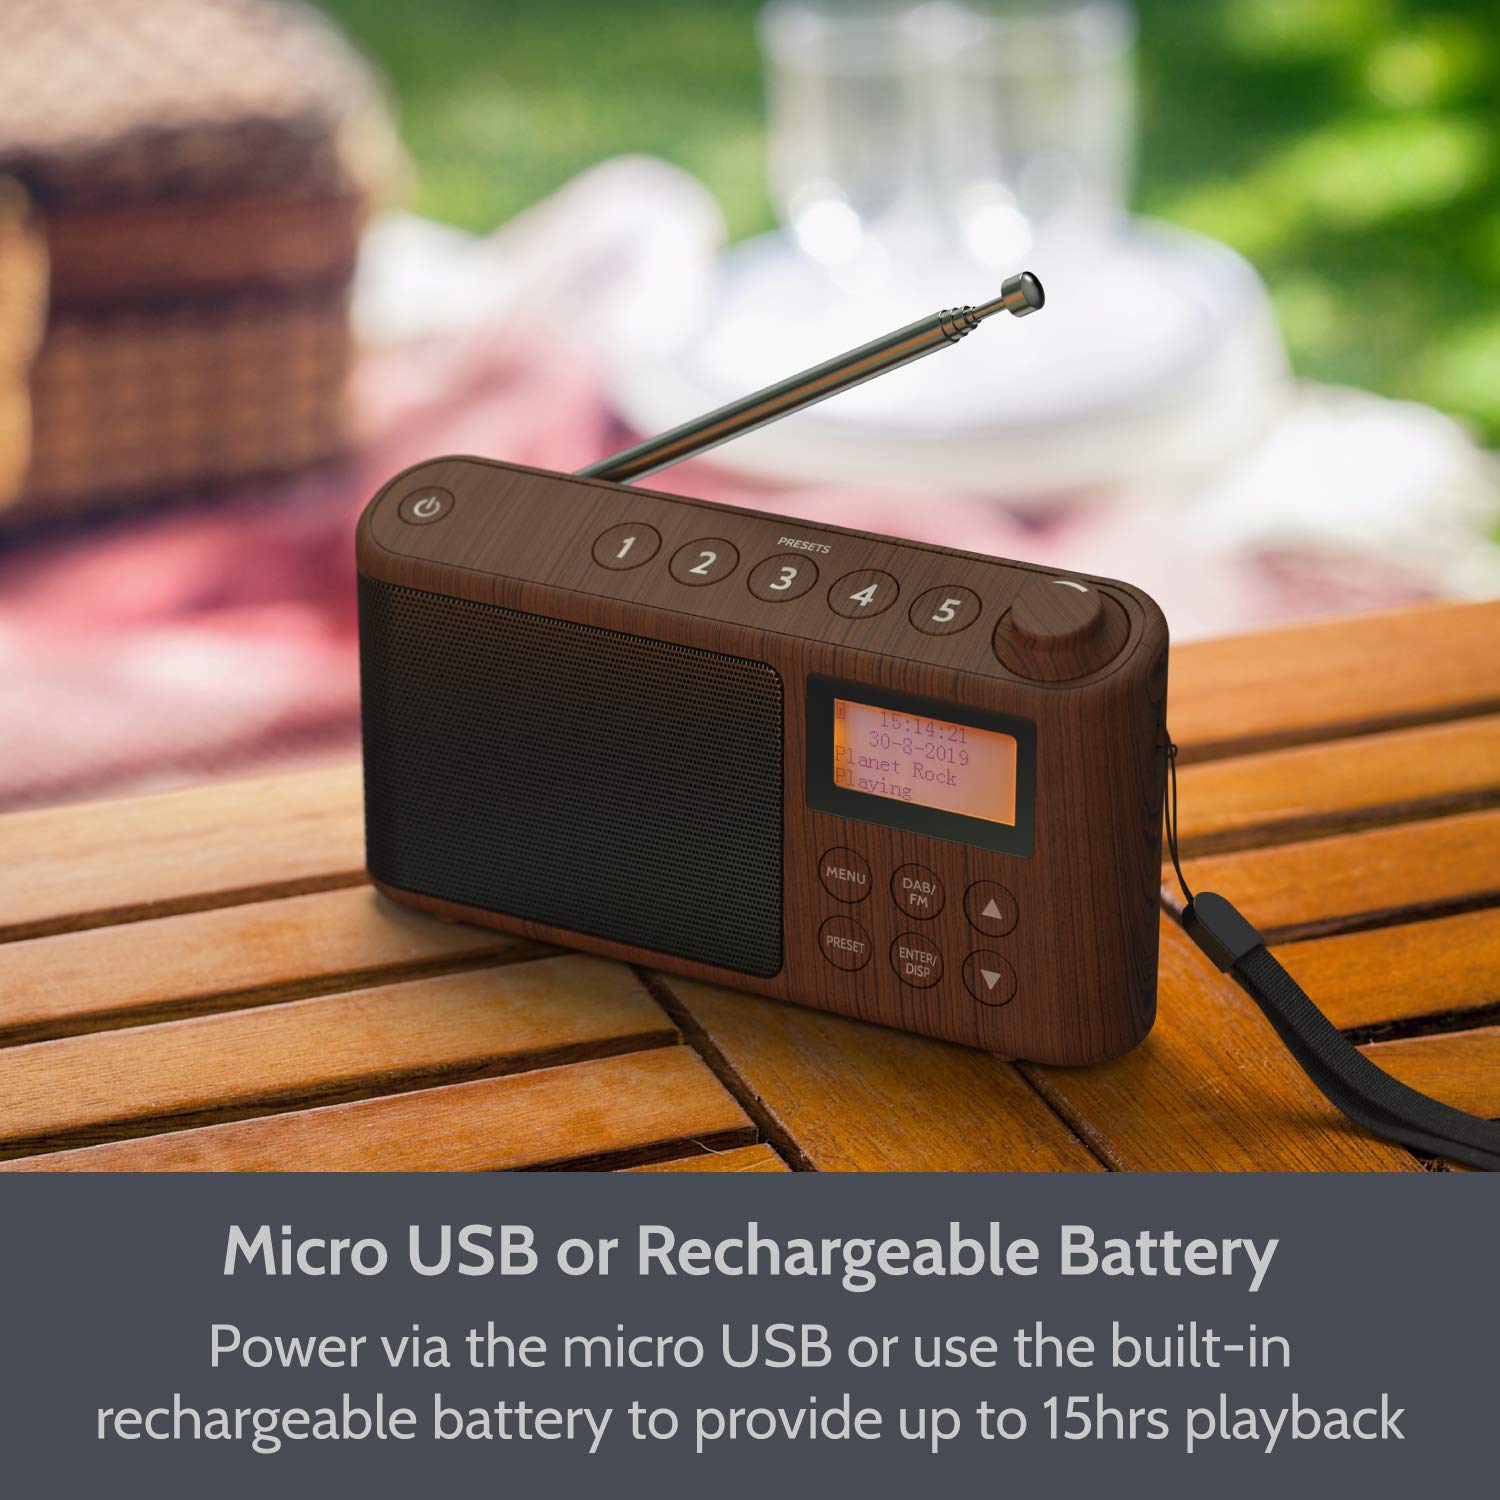 DAB/DAB+ & FM Radio, Mains and Battery Powered Portable DAB Radios Rechargeable Digital Radio with USB Charging for 15 Hours Playback (Wood Effect)